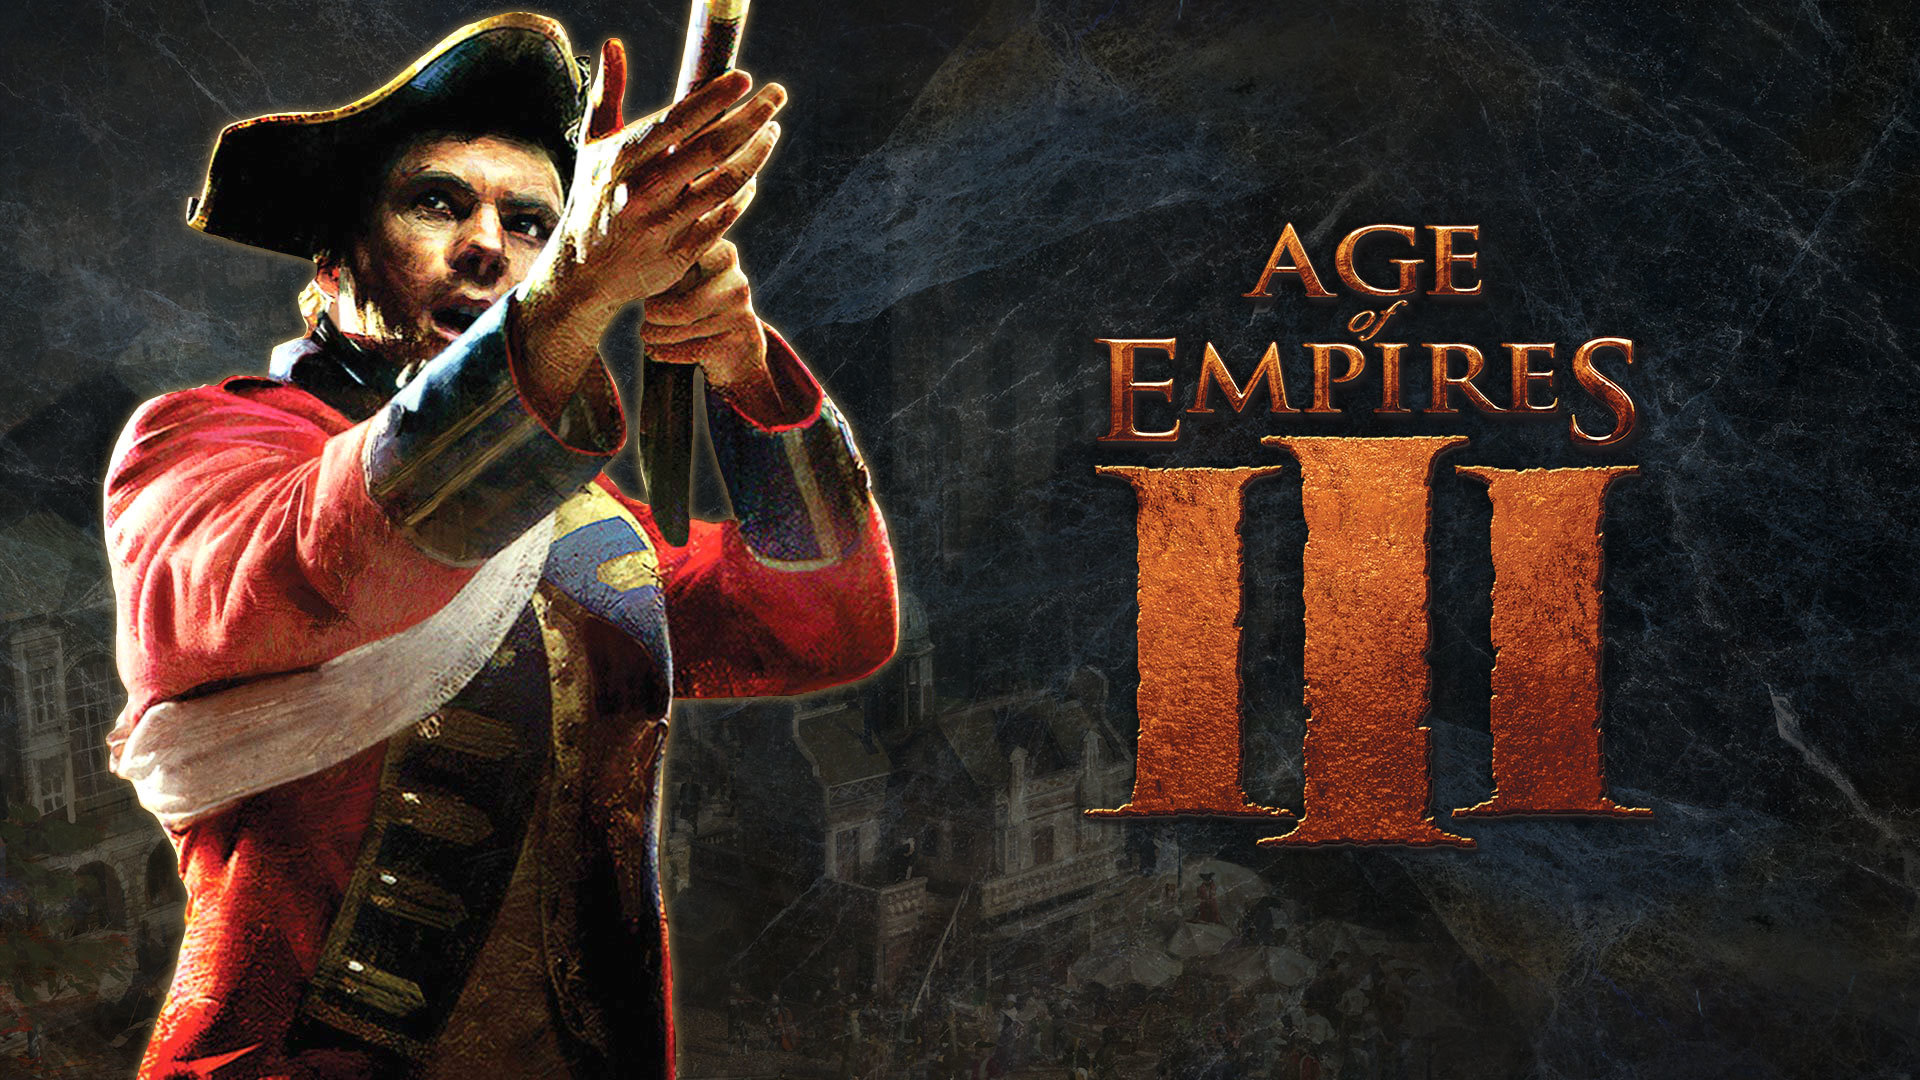 Age of empires 3 in steam фото 46